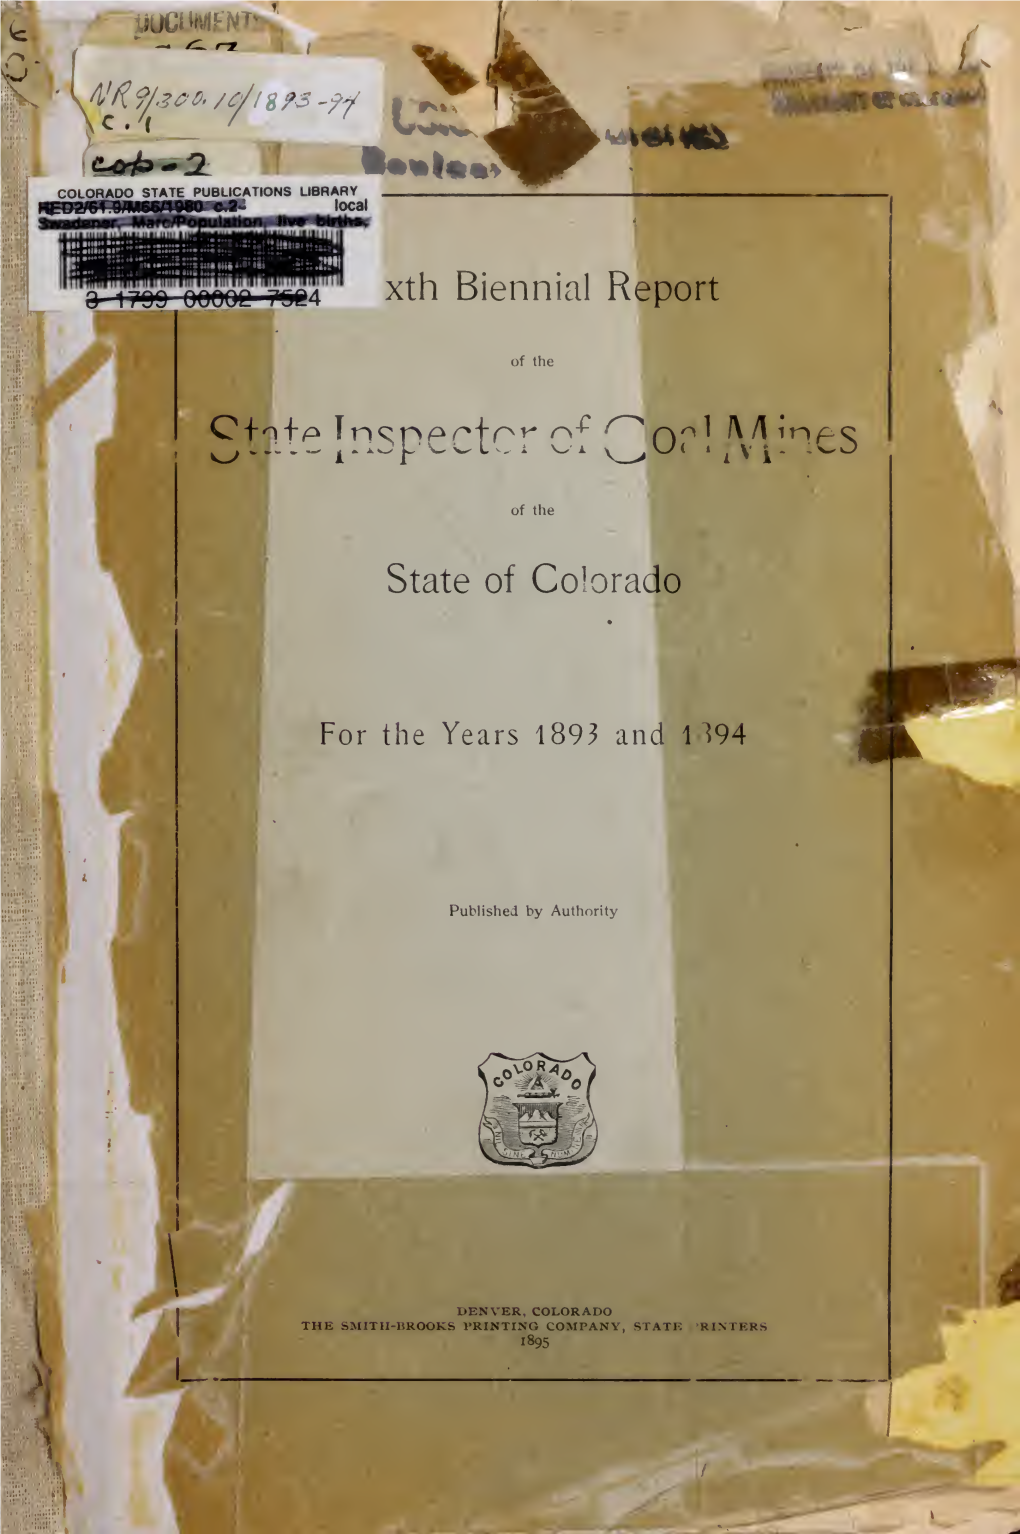 Sixth Biennial Report of the State Inspector of Coal Mines of the State